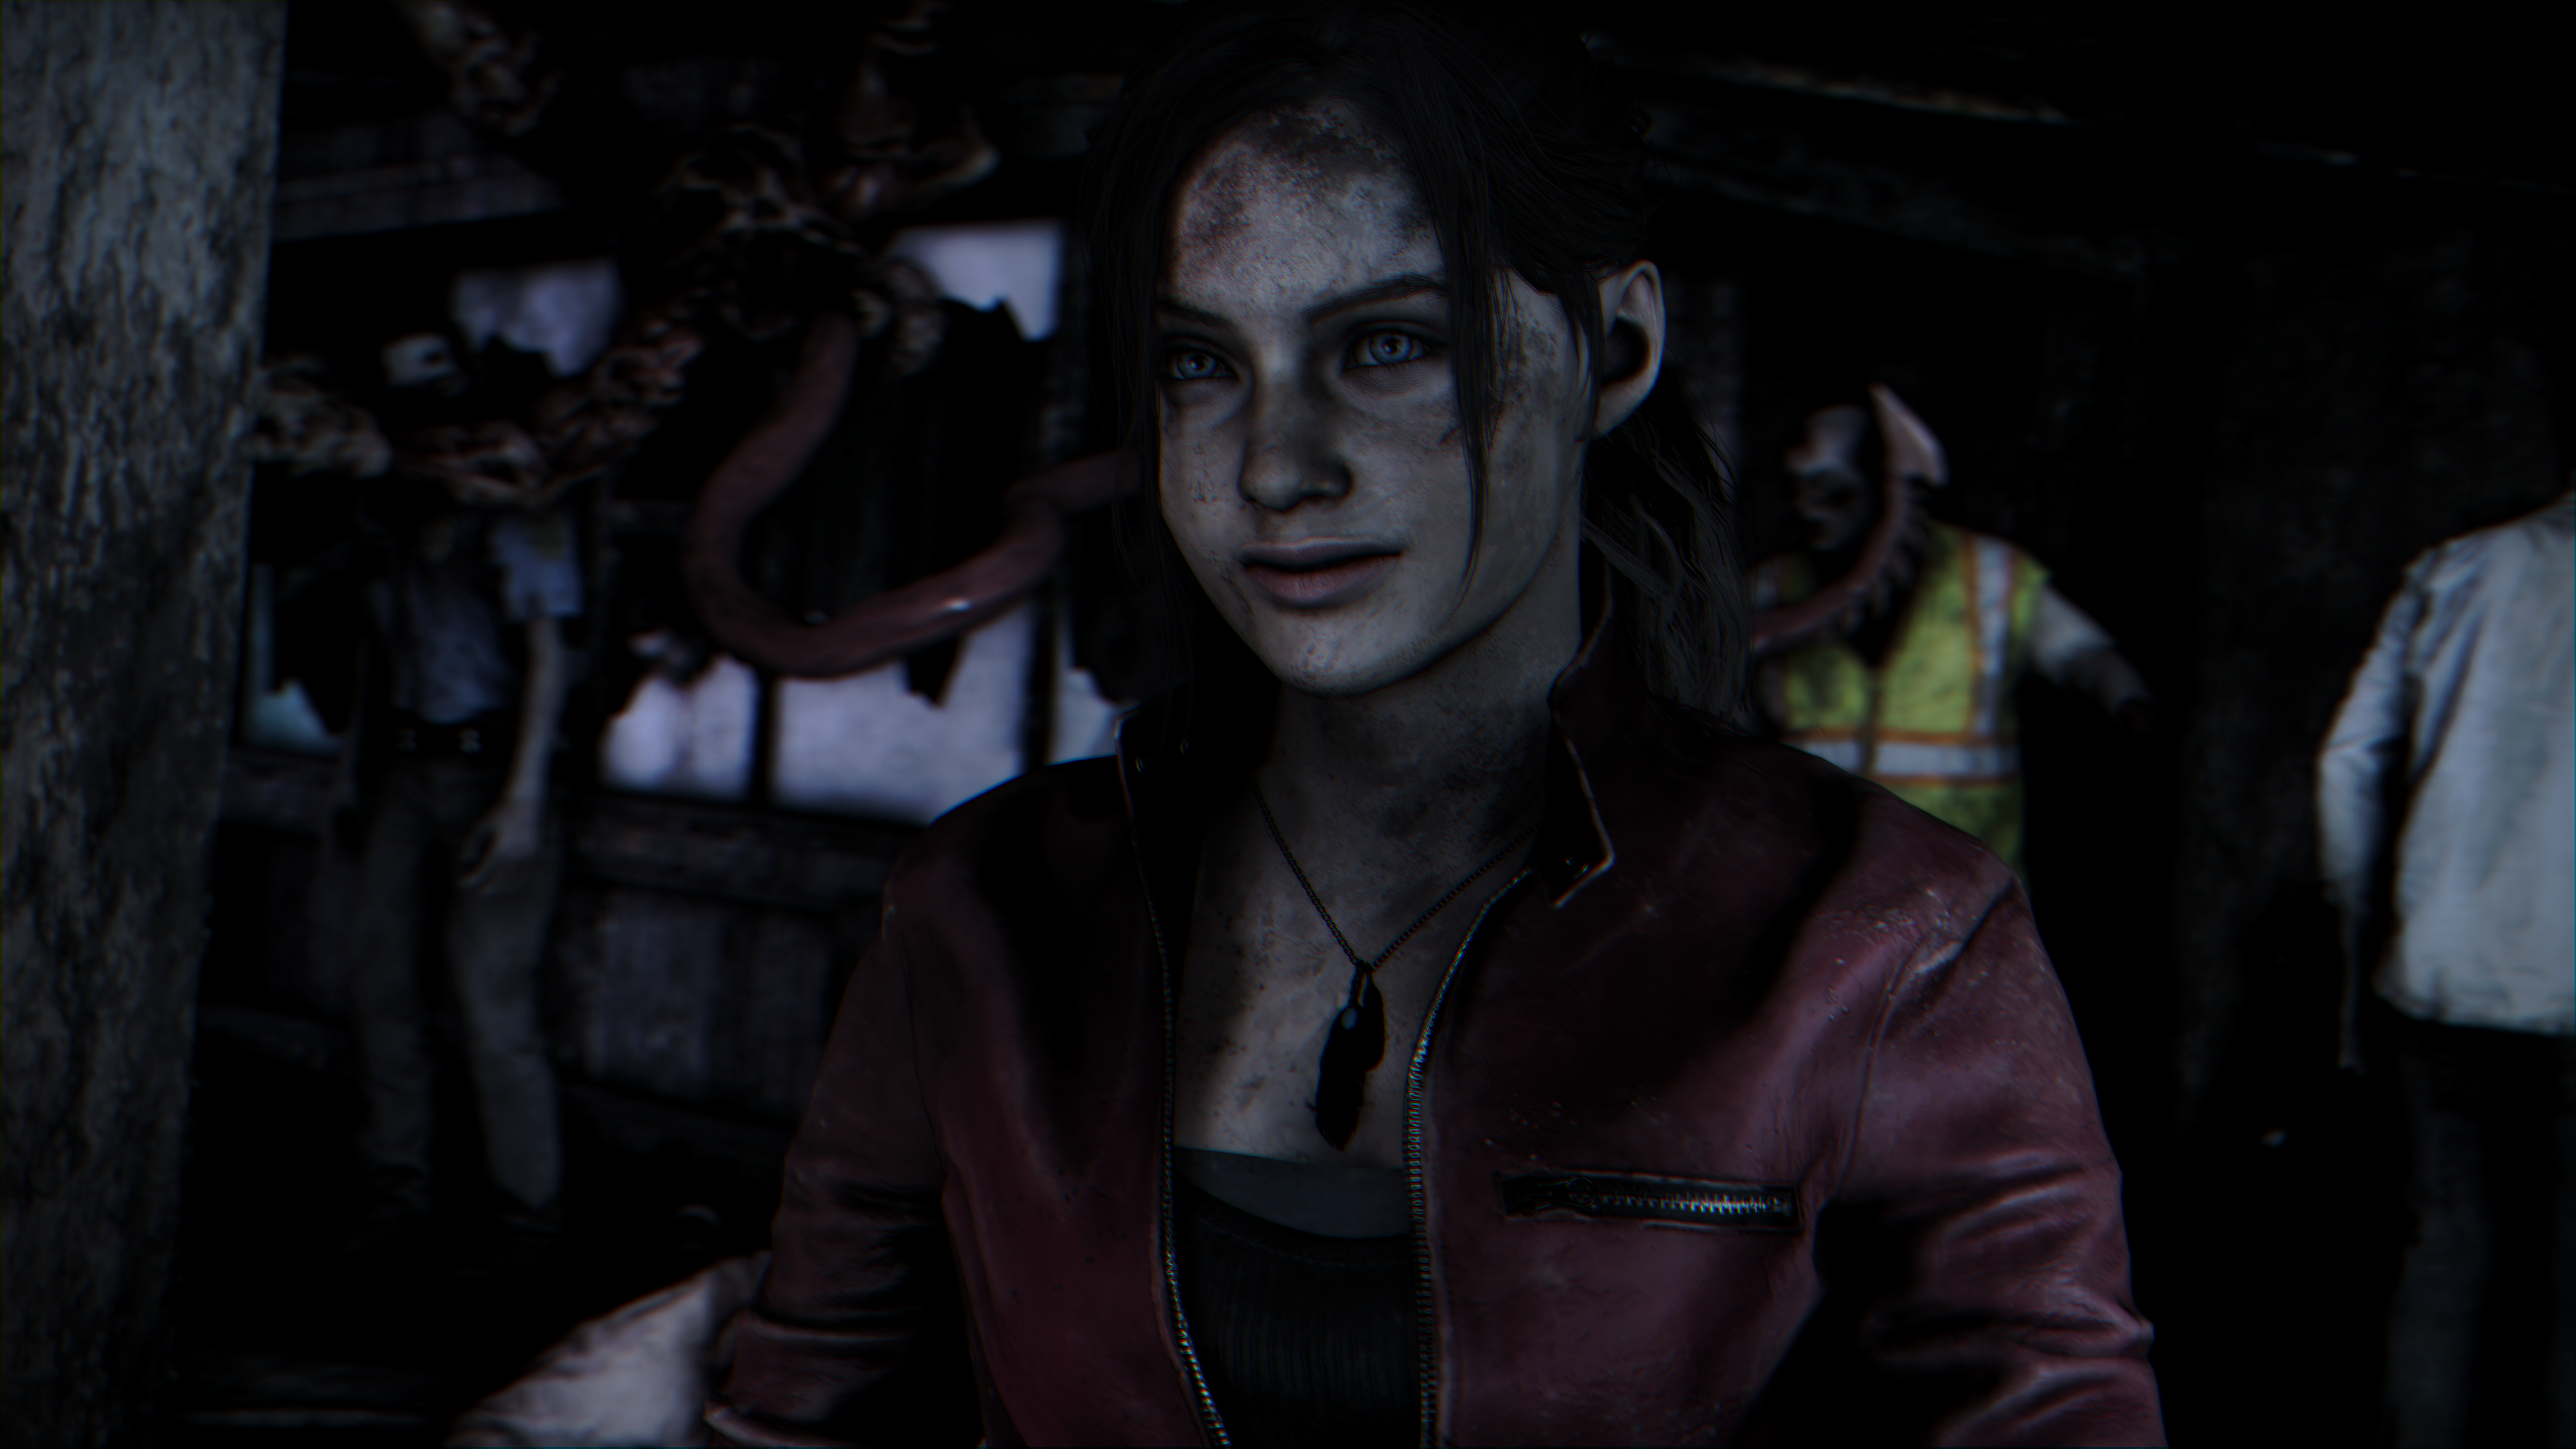 Claire Redfield [ Resident Evil ] by Despairs22 on DeviantArt